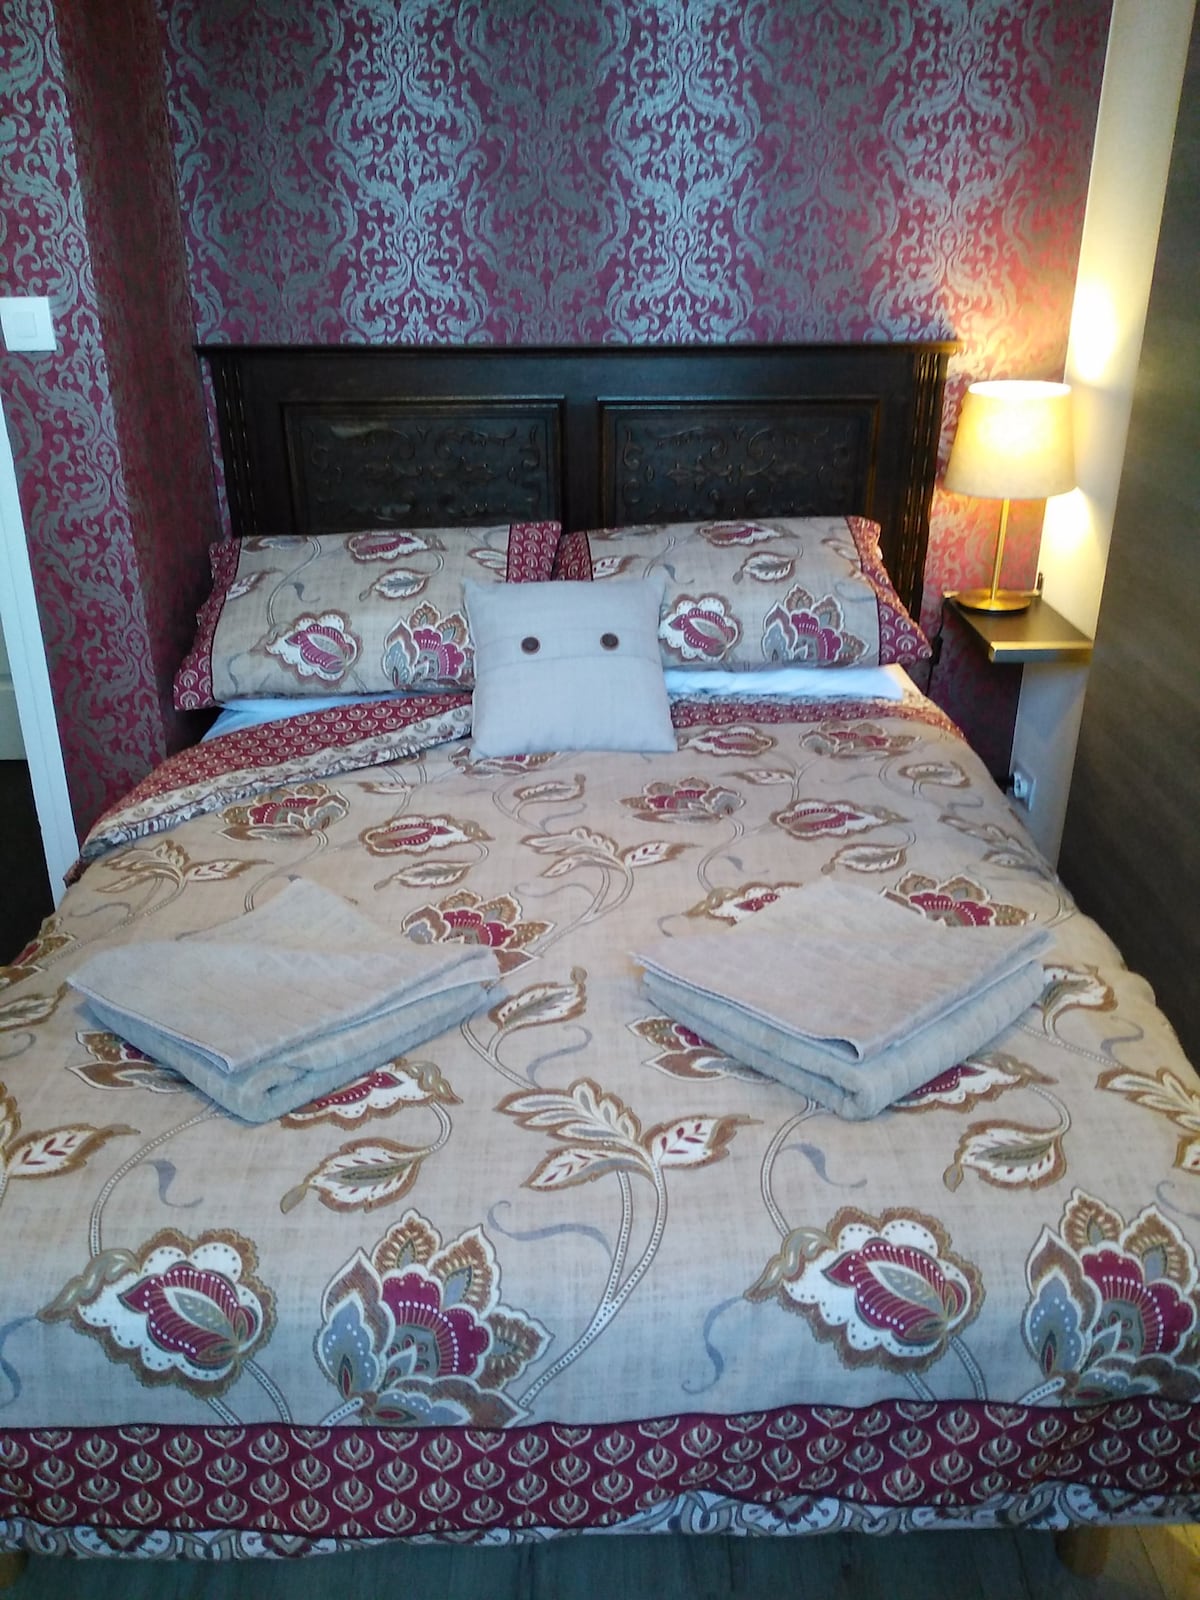 Glenbrook B&B(Margam);
Private double and ensuite.